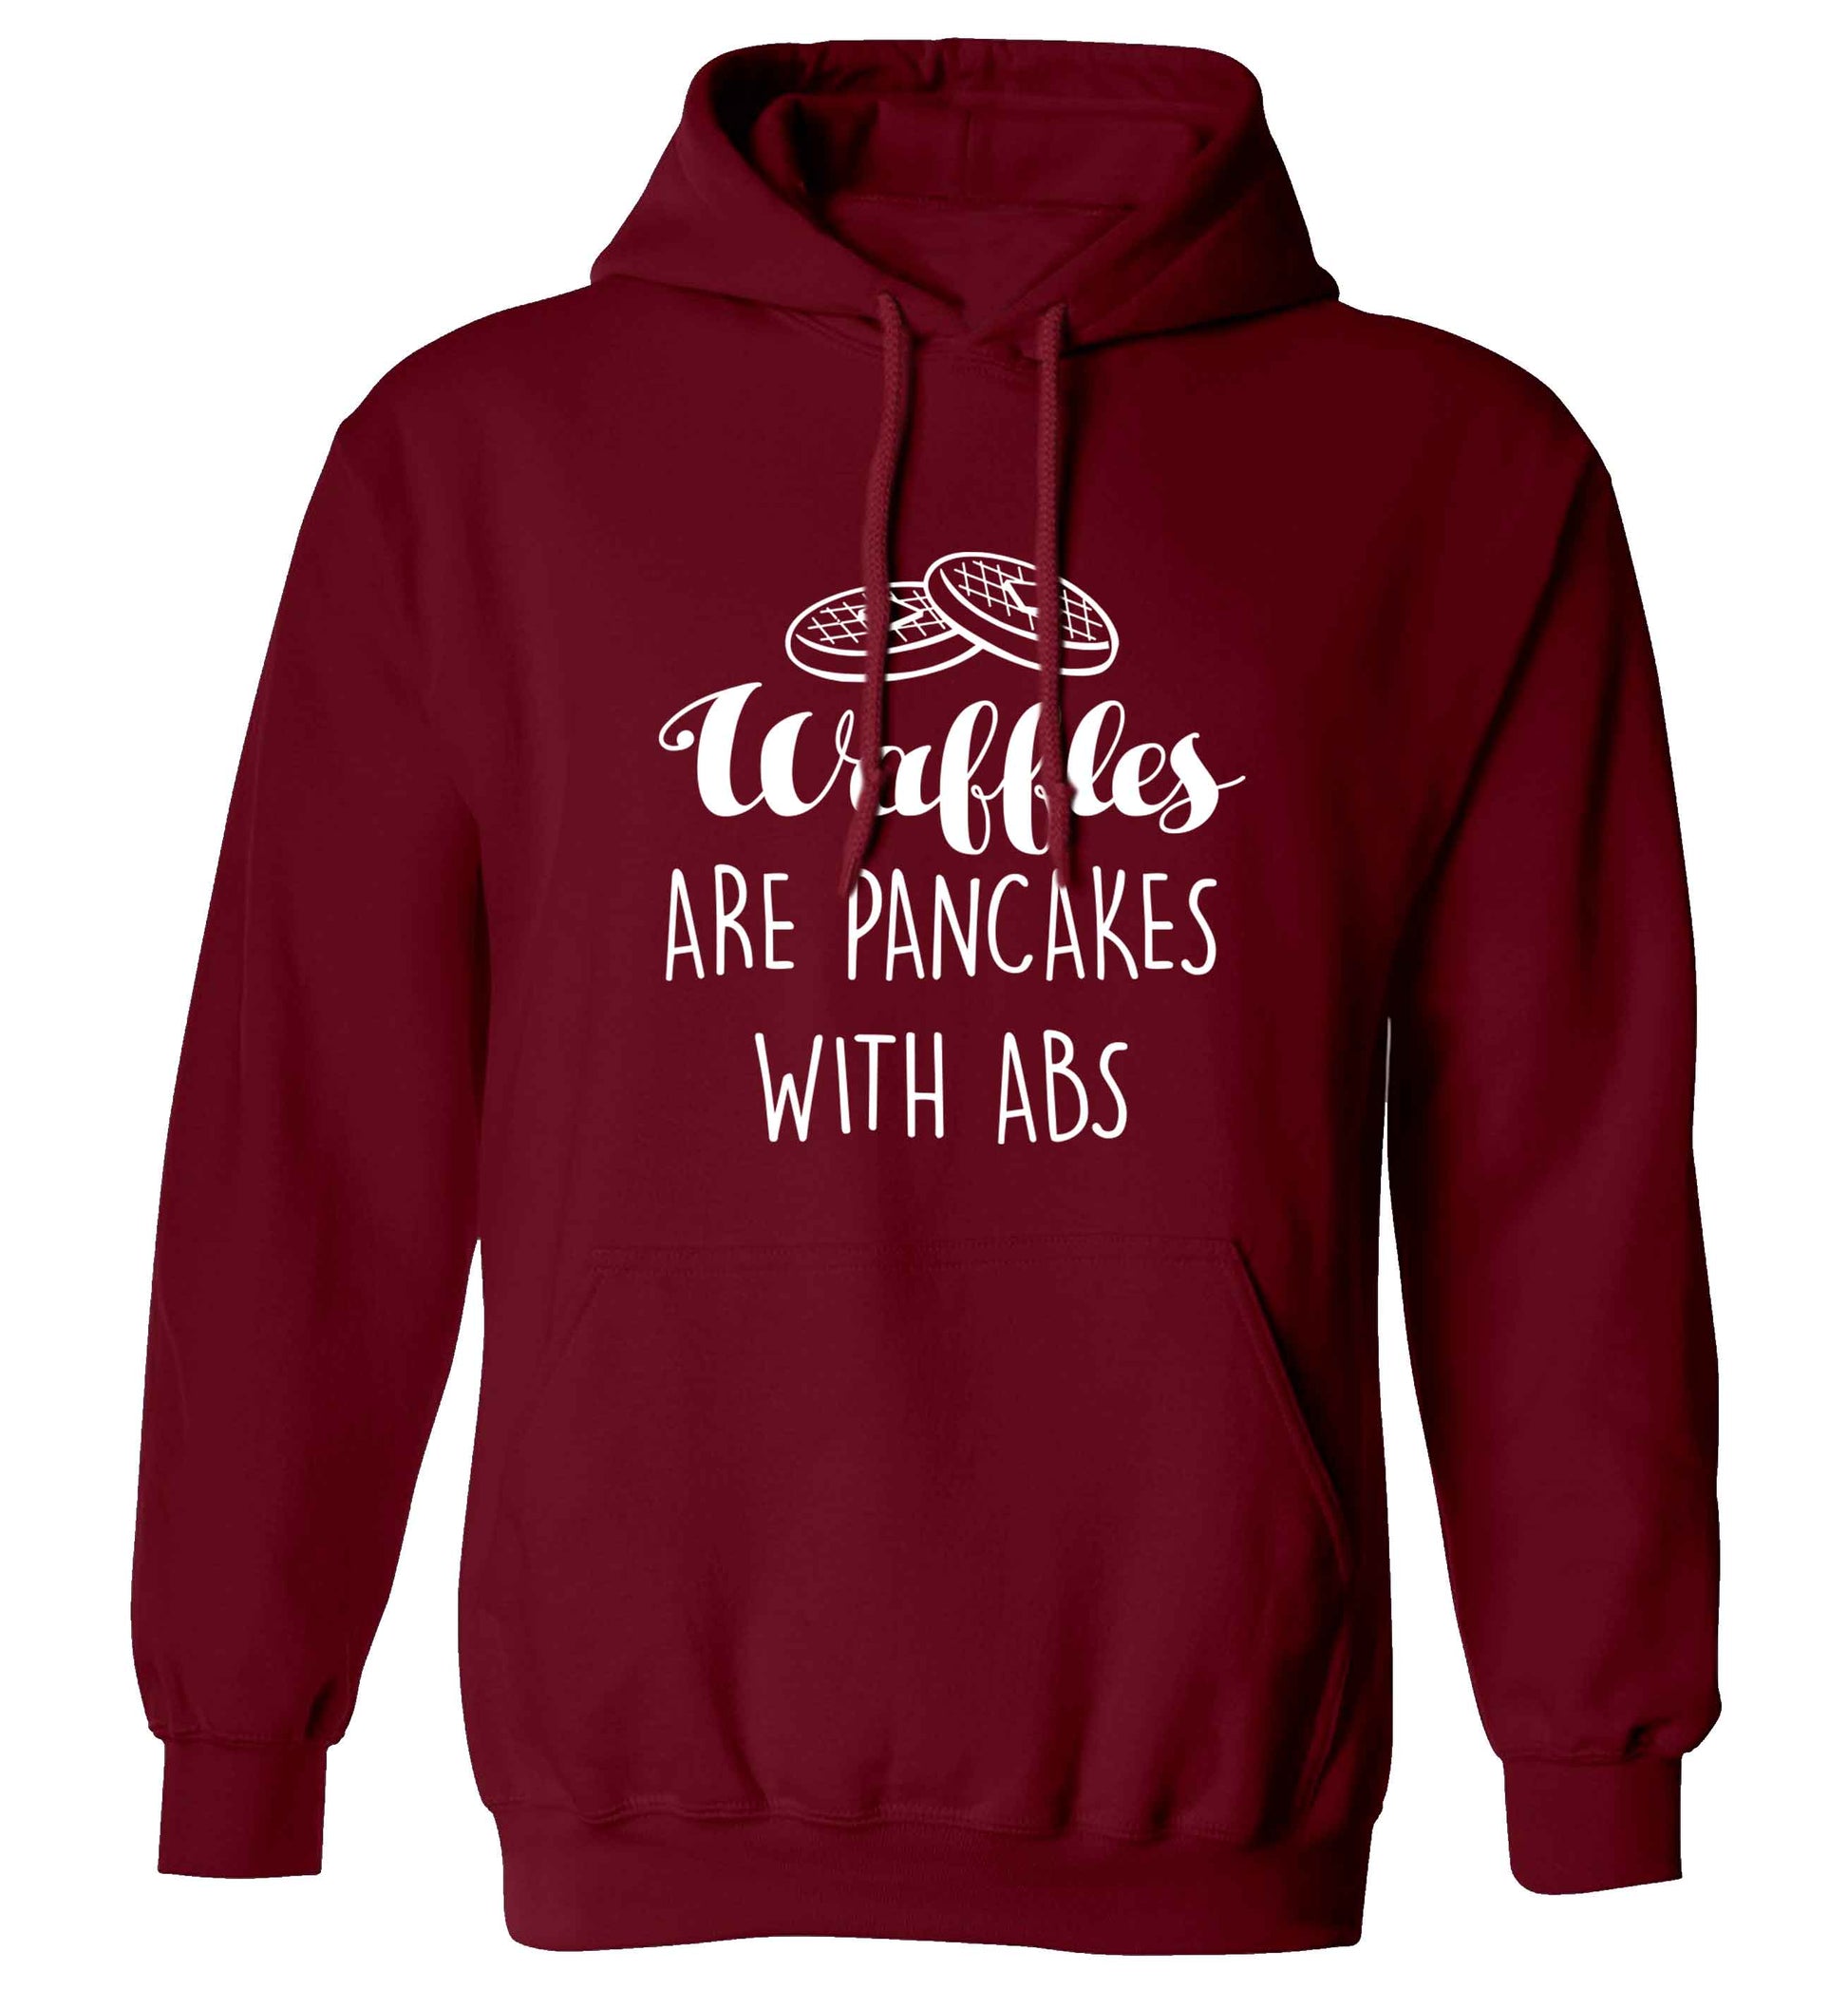 Waffles are just pancakes with abs adults unisex maroon hoodie 2XL